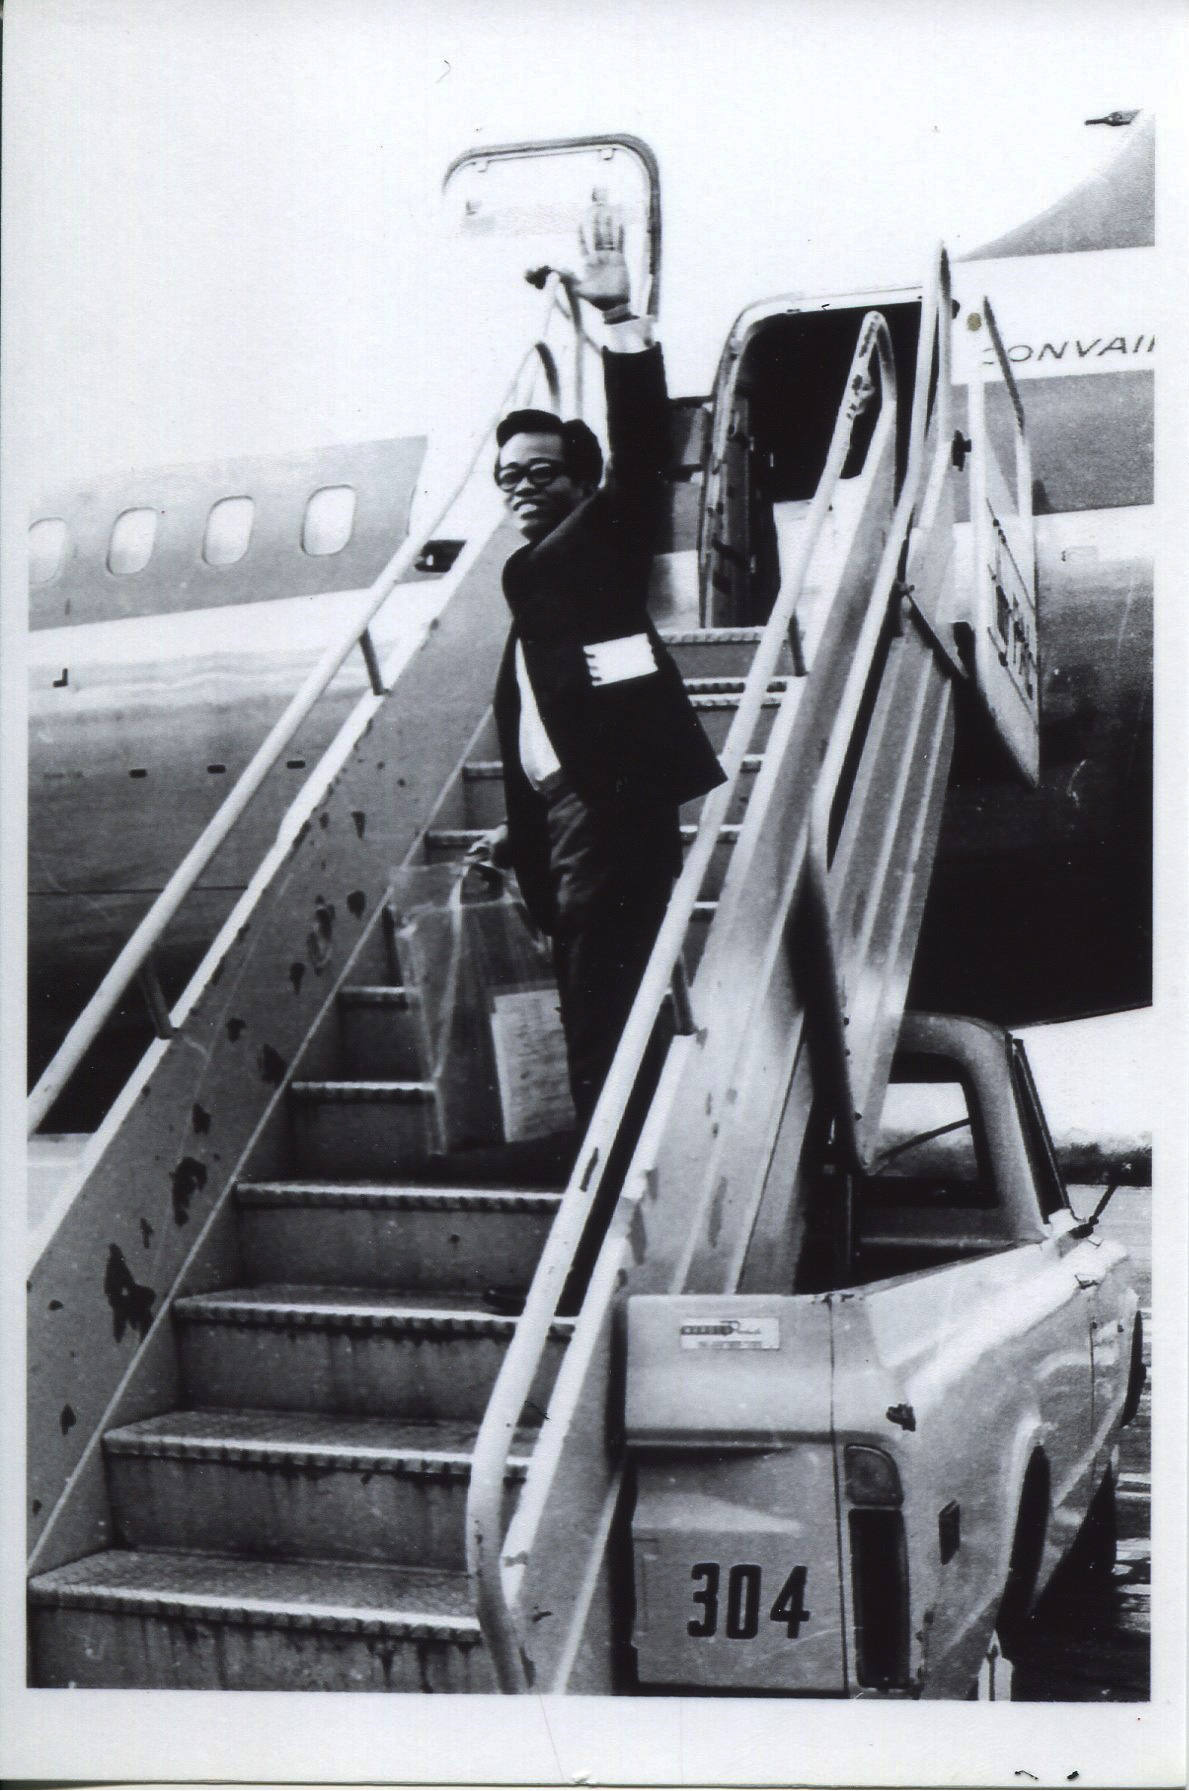 Photo of Carnate, 1971Taken in 1971 at the airport. Photographers at the airport took the photo and sold to his wife while they were saying goodbye. It was common for photographers to take emigration photos to sell to families. Pictured is Orlando waving from the plane as he leaves Manila. Any views, findings, conclusions, or recommendations expressed in this story do not necessarily represent those of the National Endowment for the Humanities. (c) Field Museum of Natural History - CC BY-NC 4.0